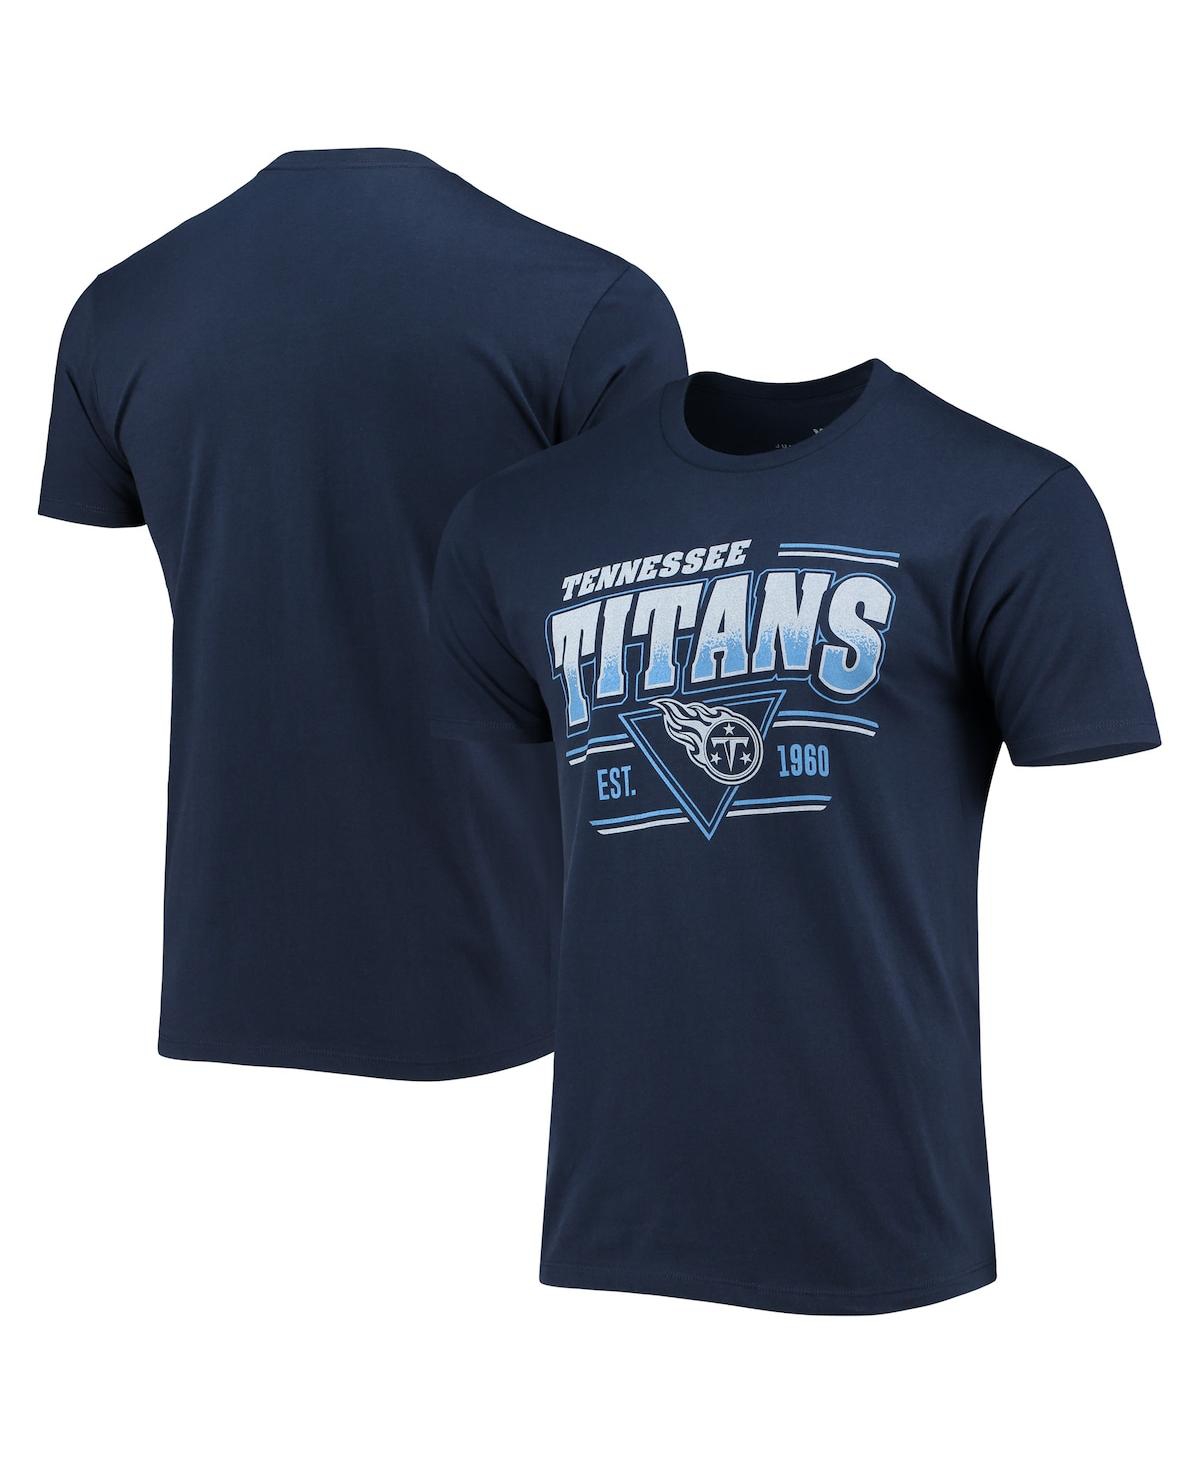 Men's Navy Tennessee Titans Throwback T-shirt - Navy